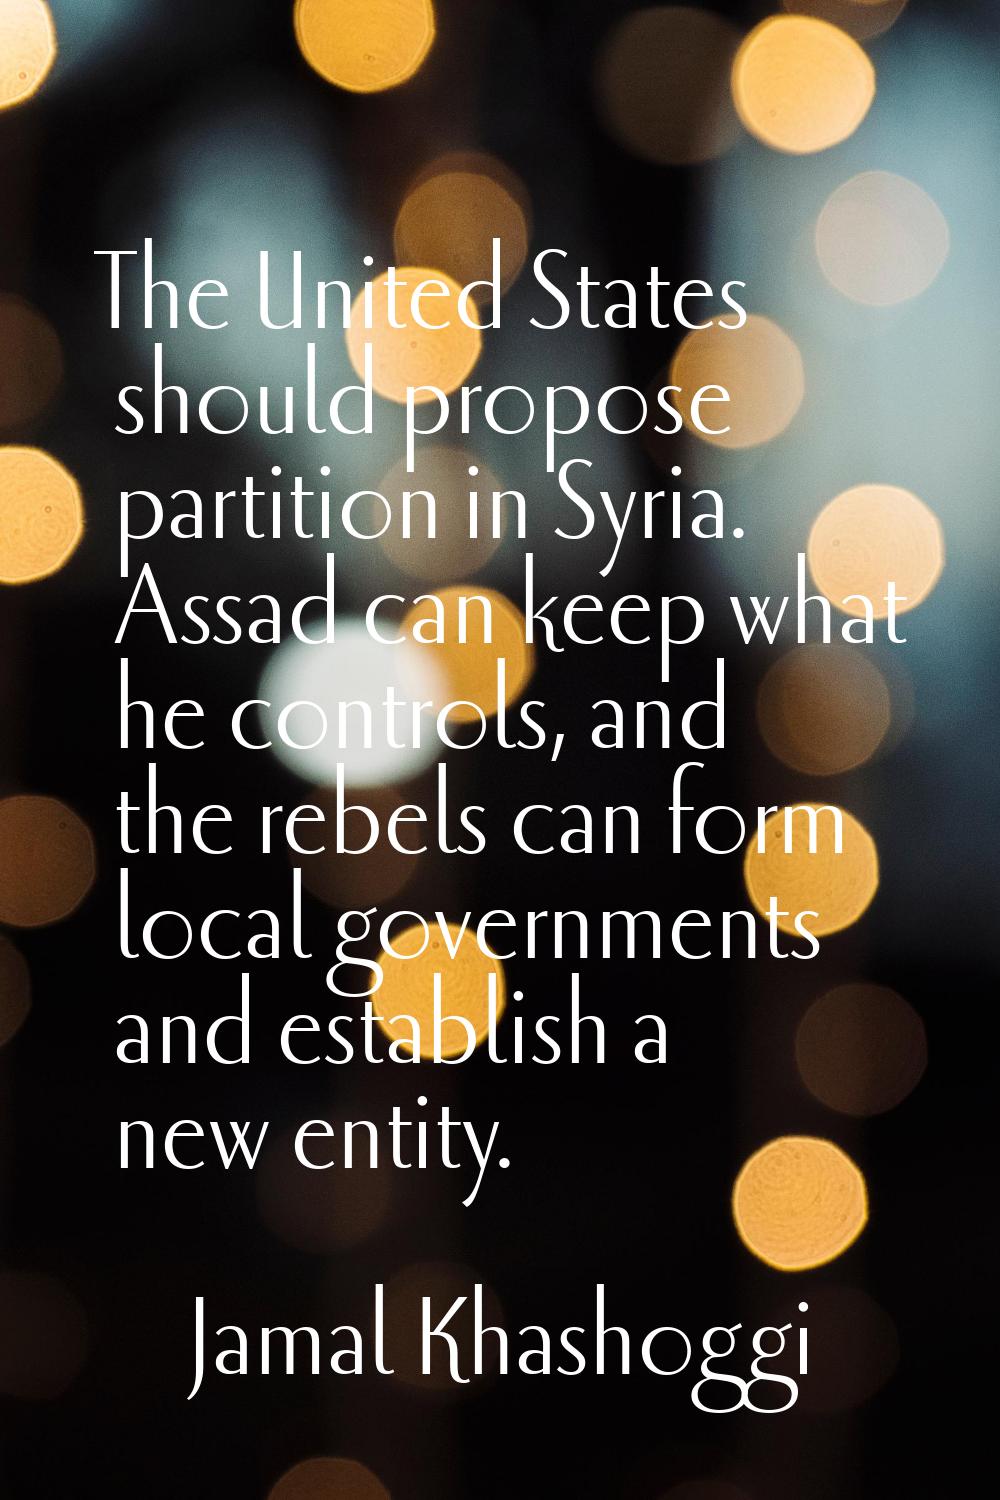 The United States should propose partition in Syria. Assad can keep what he controls, and the rebel